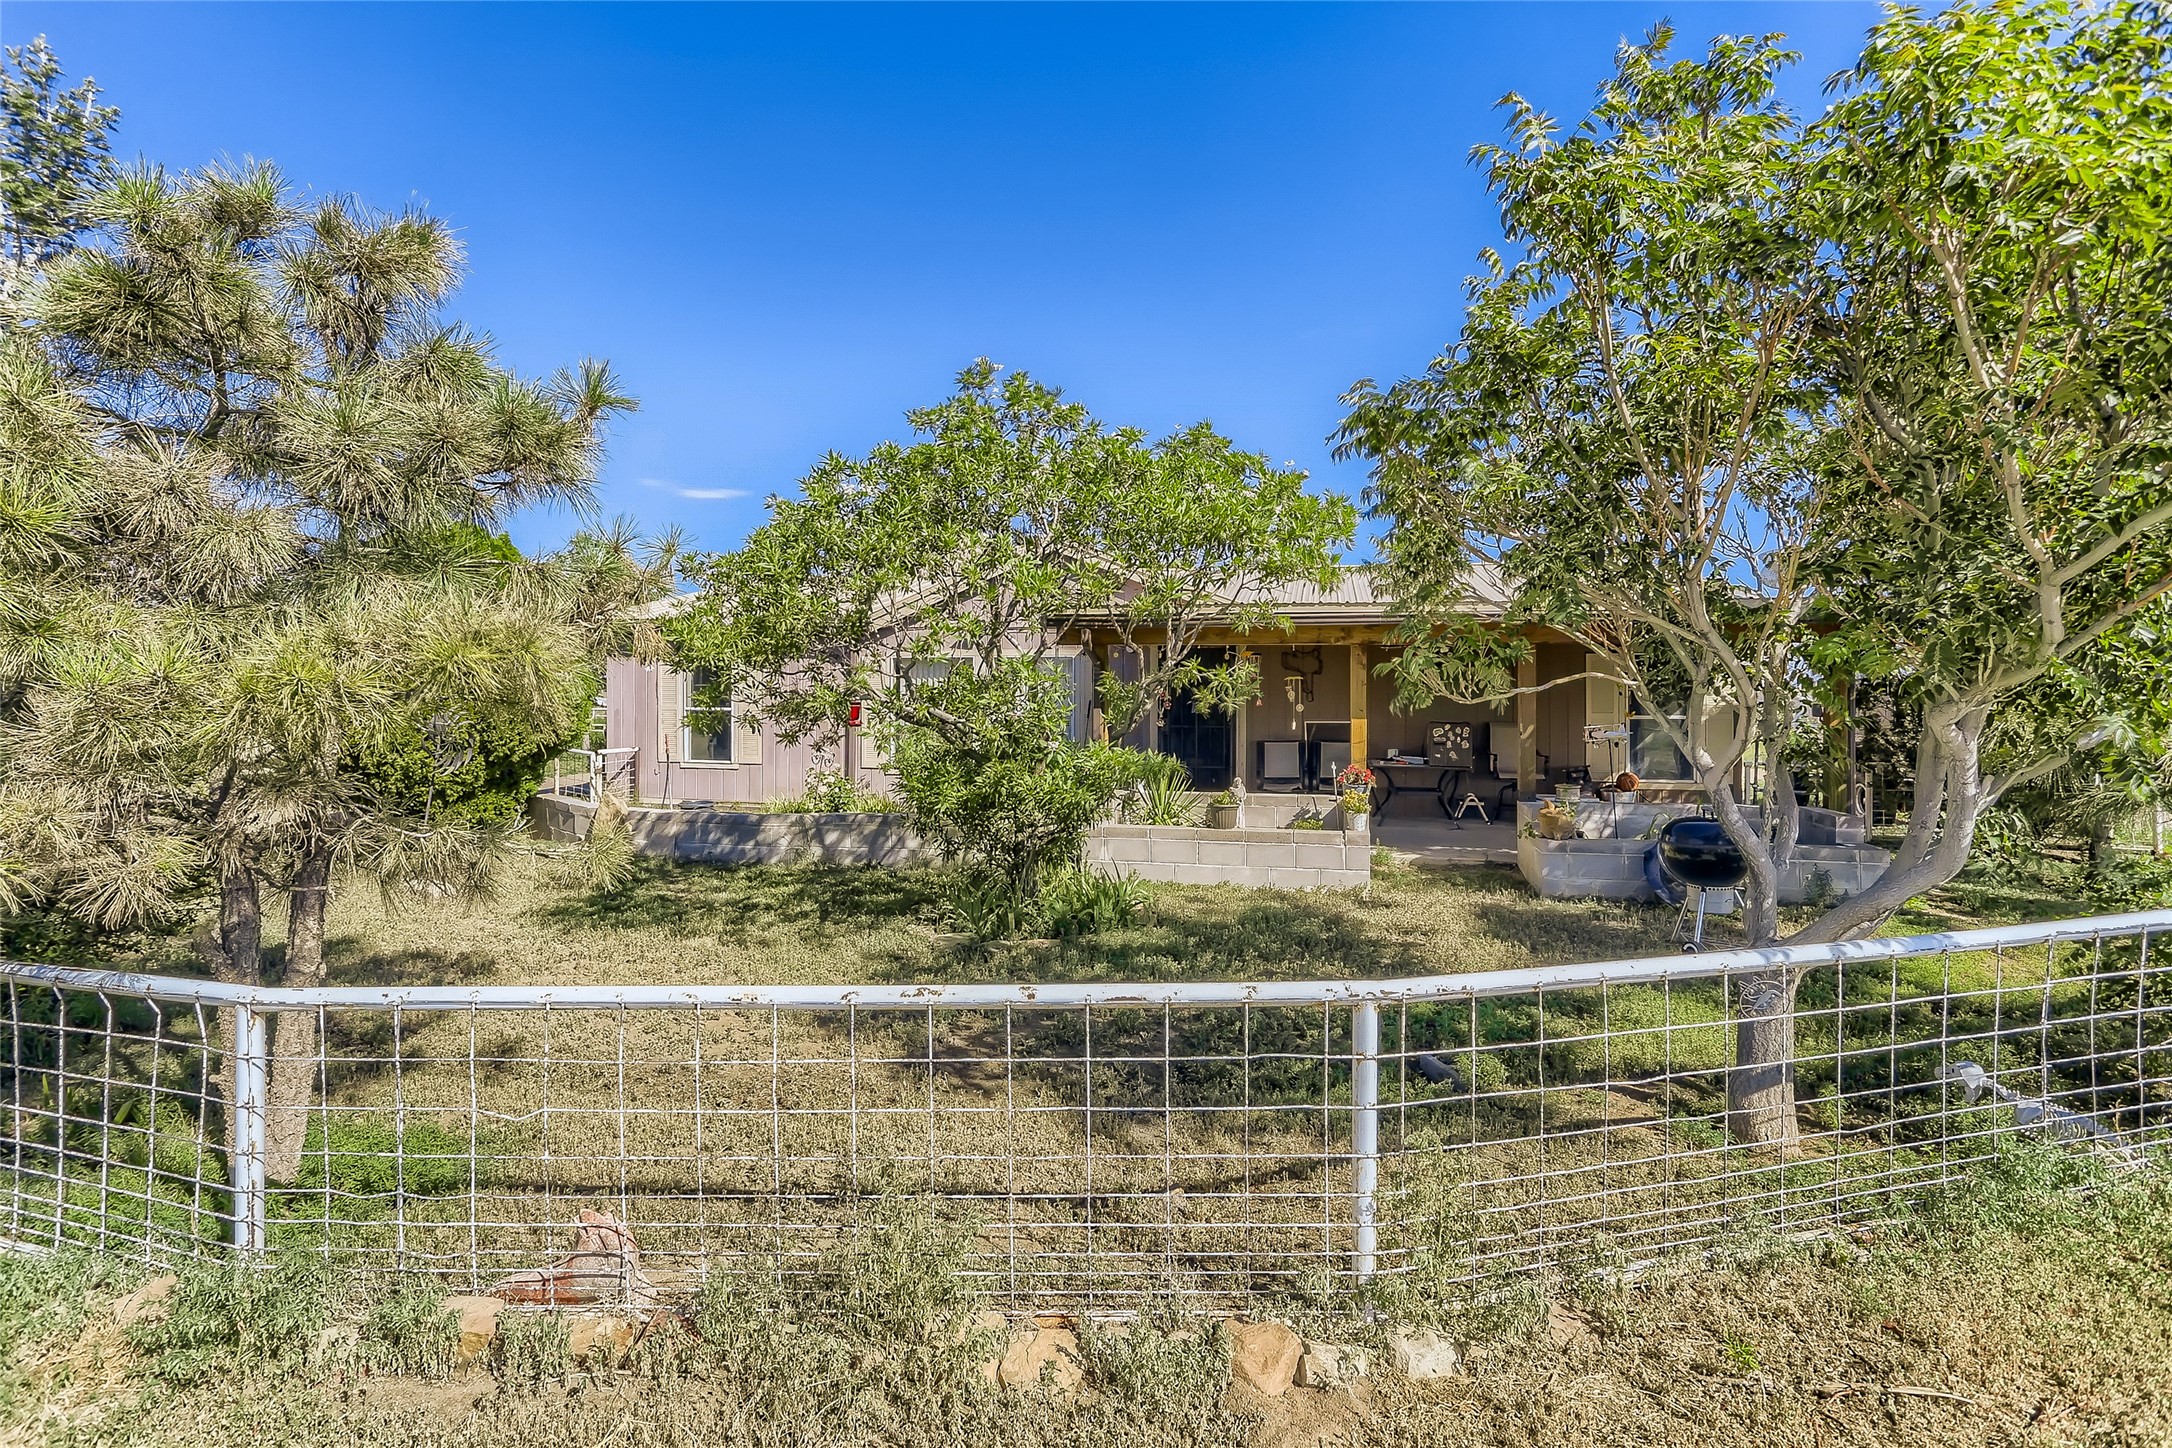 18 W Nambe, Santa Fe, New Mexico 87508, 3 Bedrooms Bedrooms, ,2 BathroomsBathrooms,Residential,For Sale,18 W Nambe,202232313